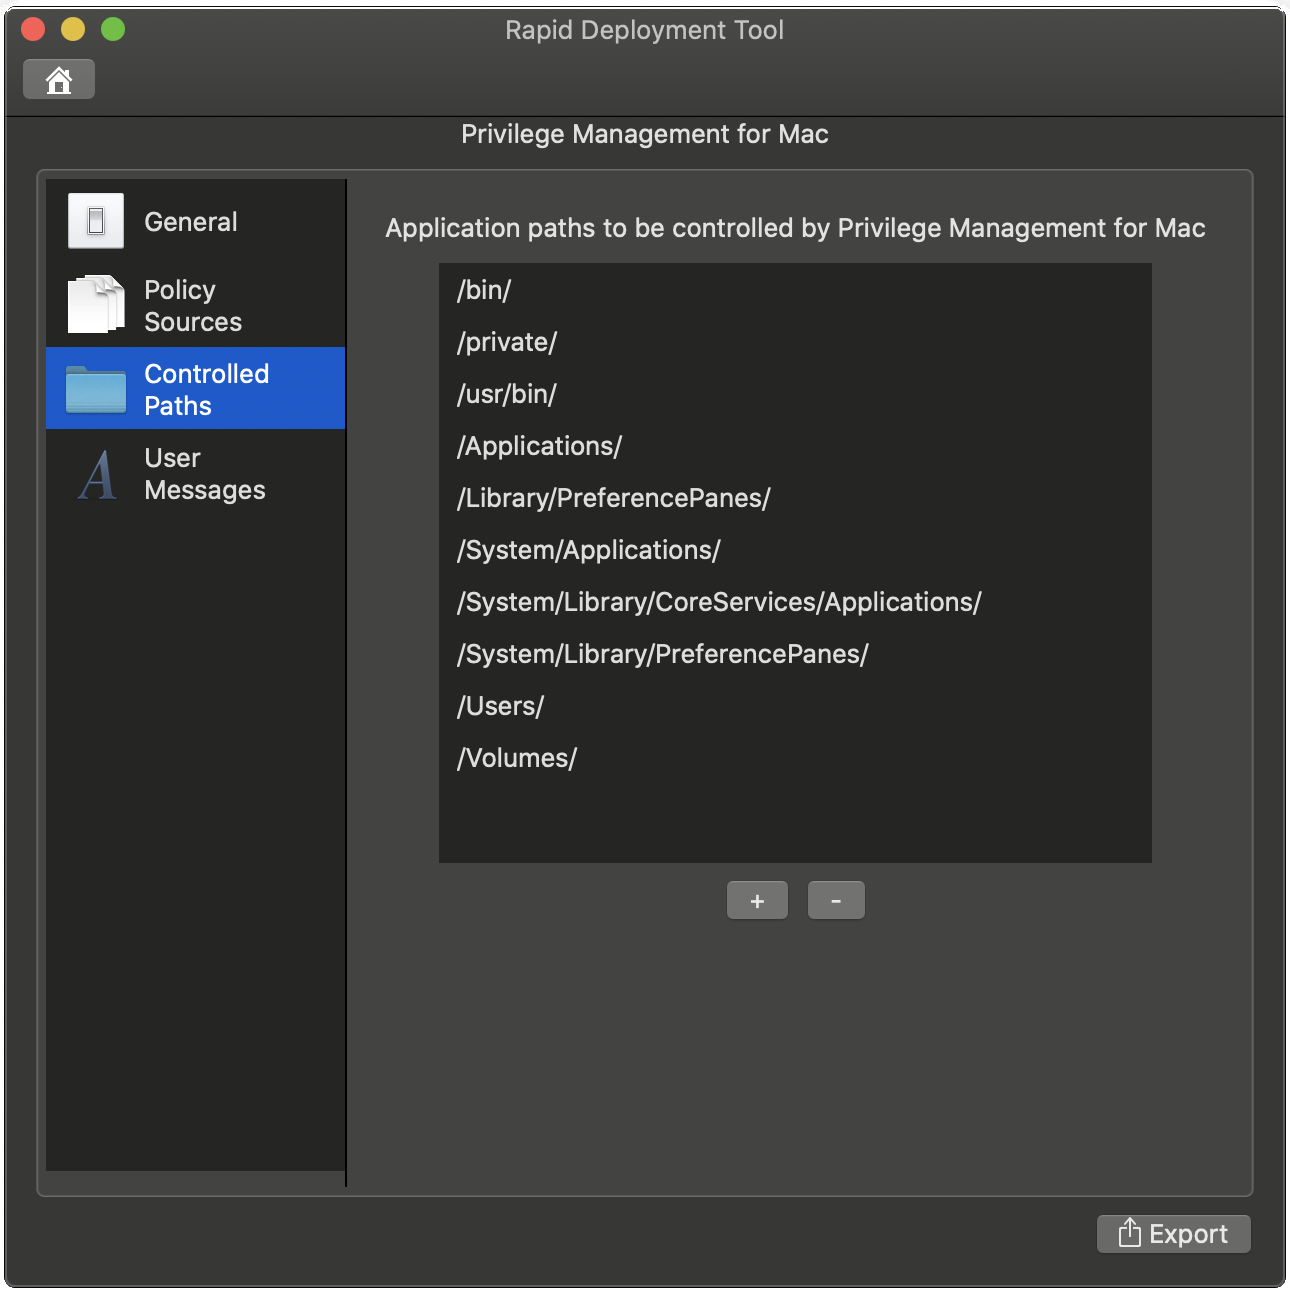 Controlled Paths: Add or remove application paths that will be contolled by Privilege Management for Mac.